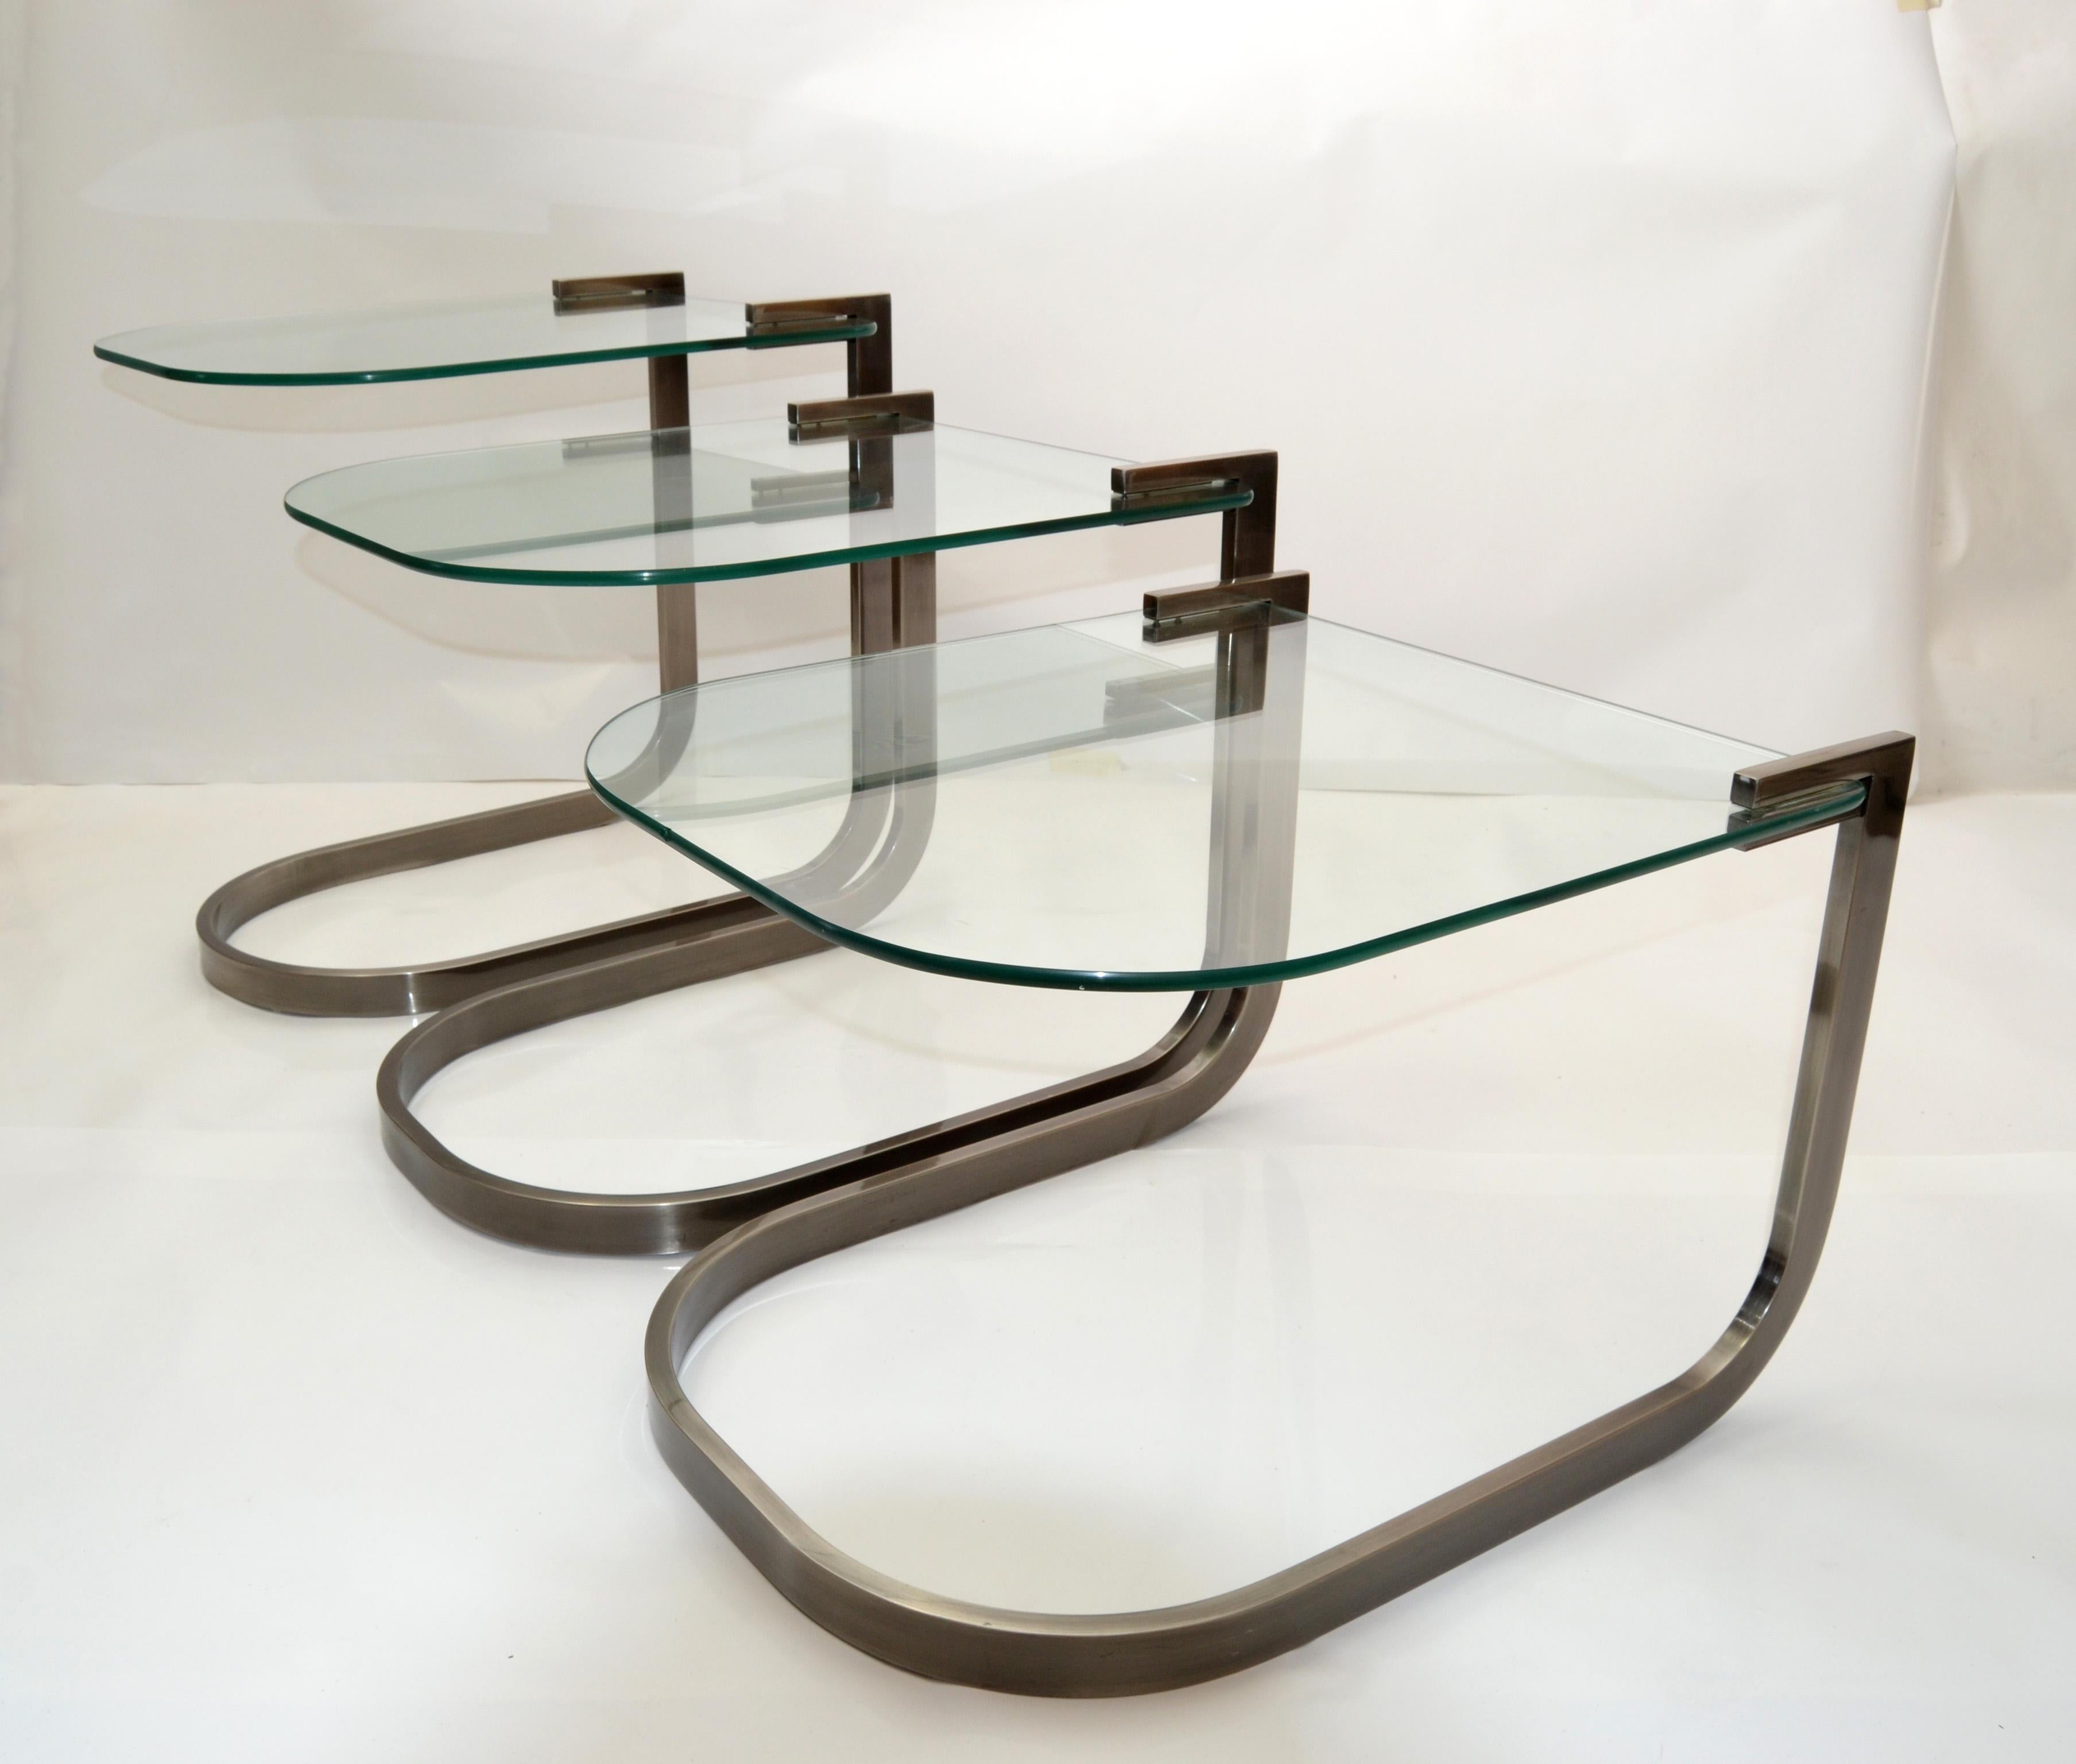 American Design Institute of America 'DIA' Three Vintage Glass & Steel Nesting Tables For Sale